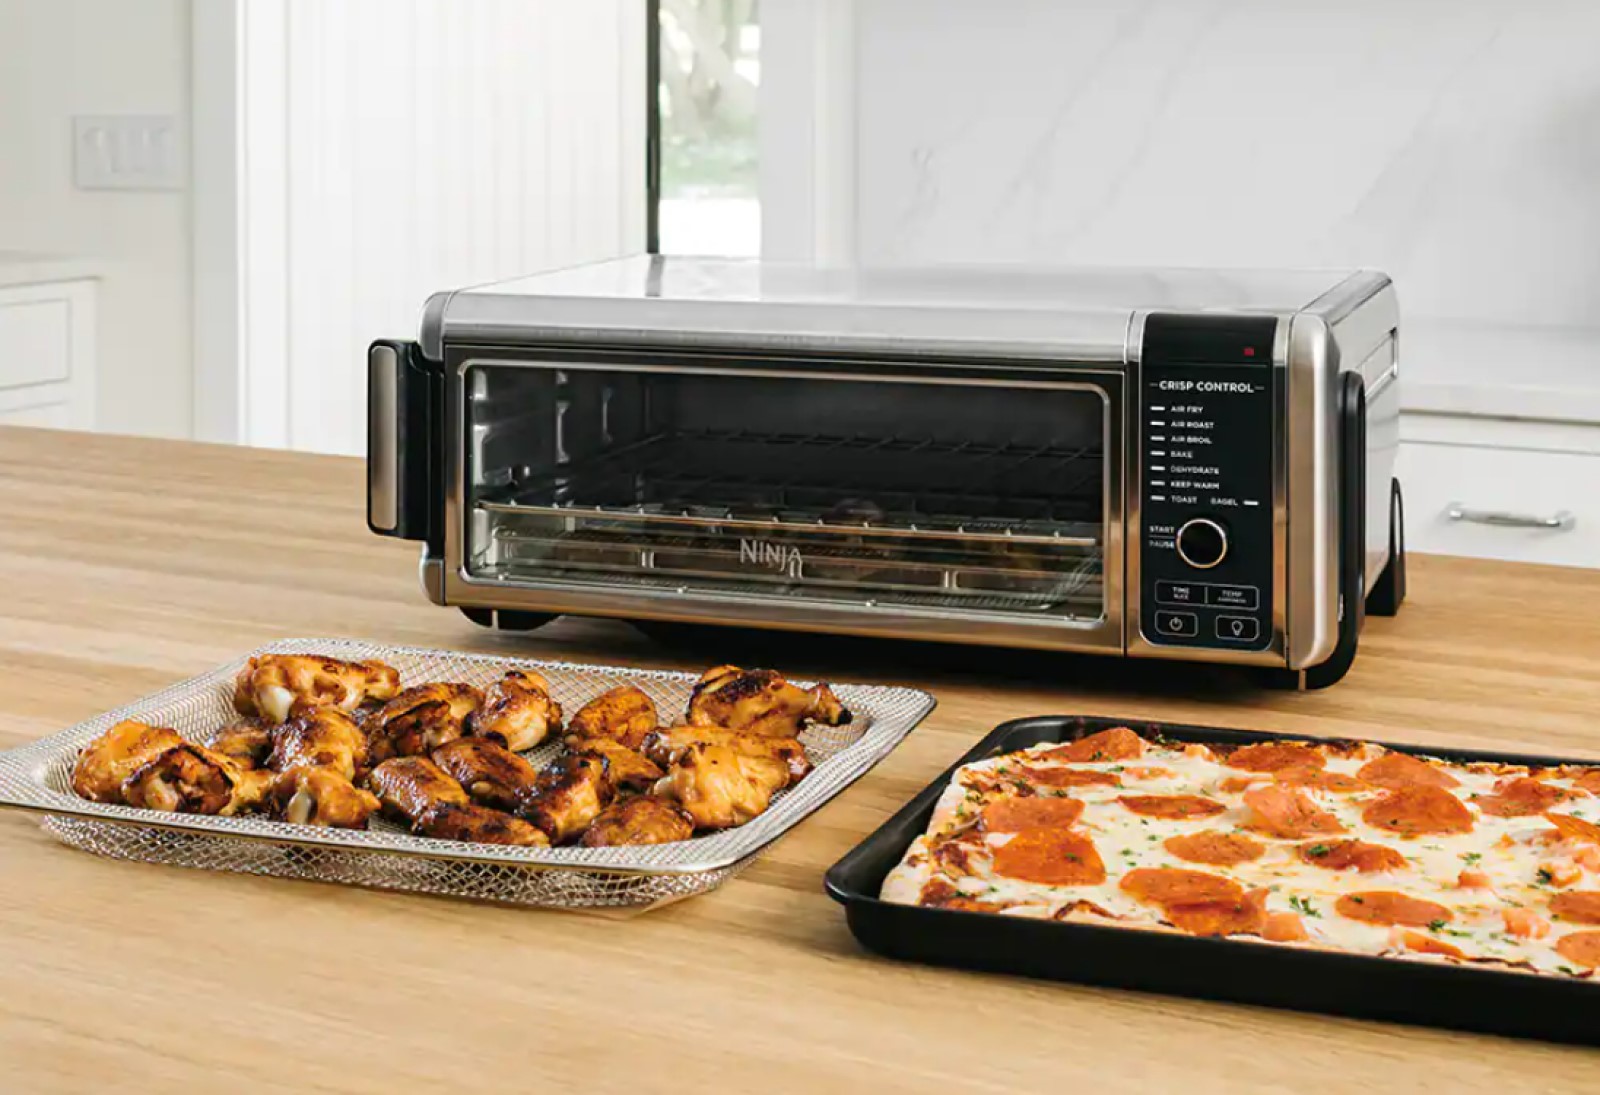 Ninja Foodi Digital Air Fry Toaster Oven: Multifunctional Cooking with Air Fry Technology